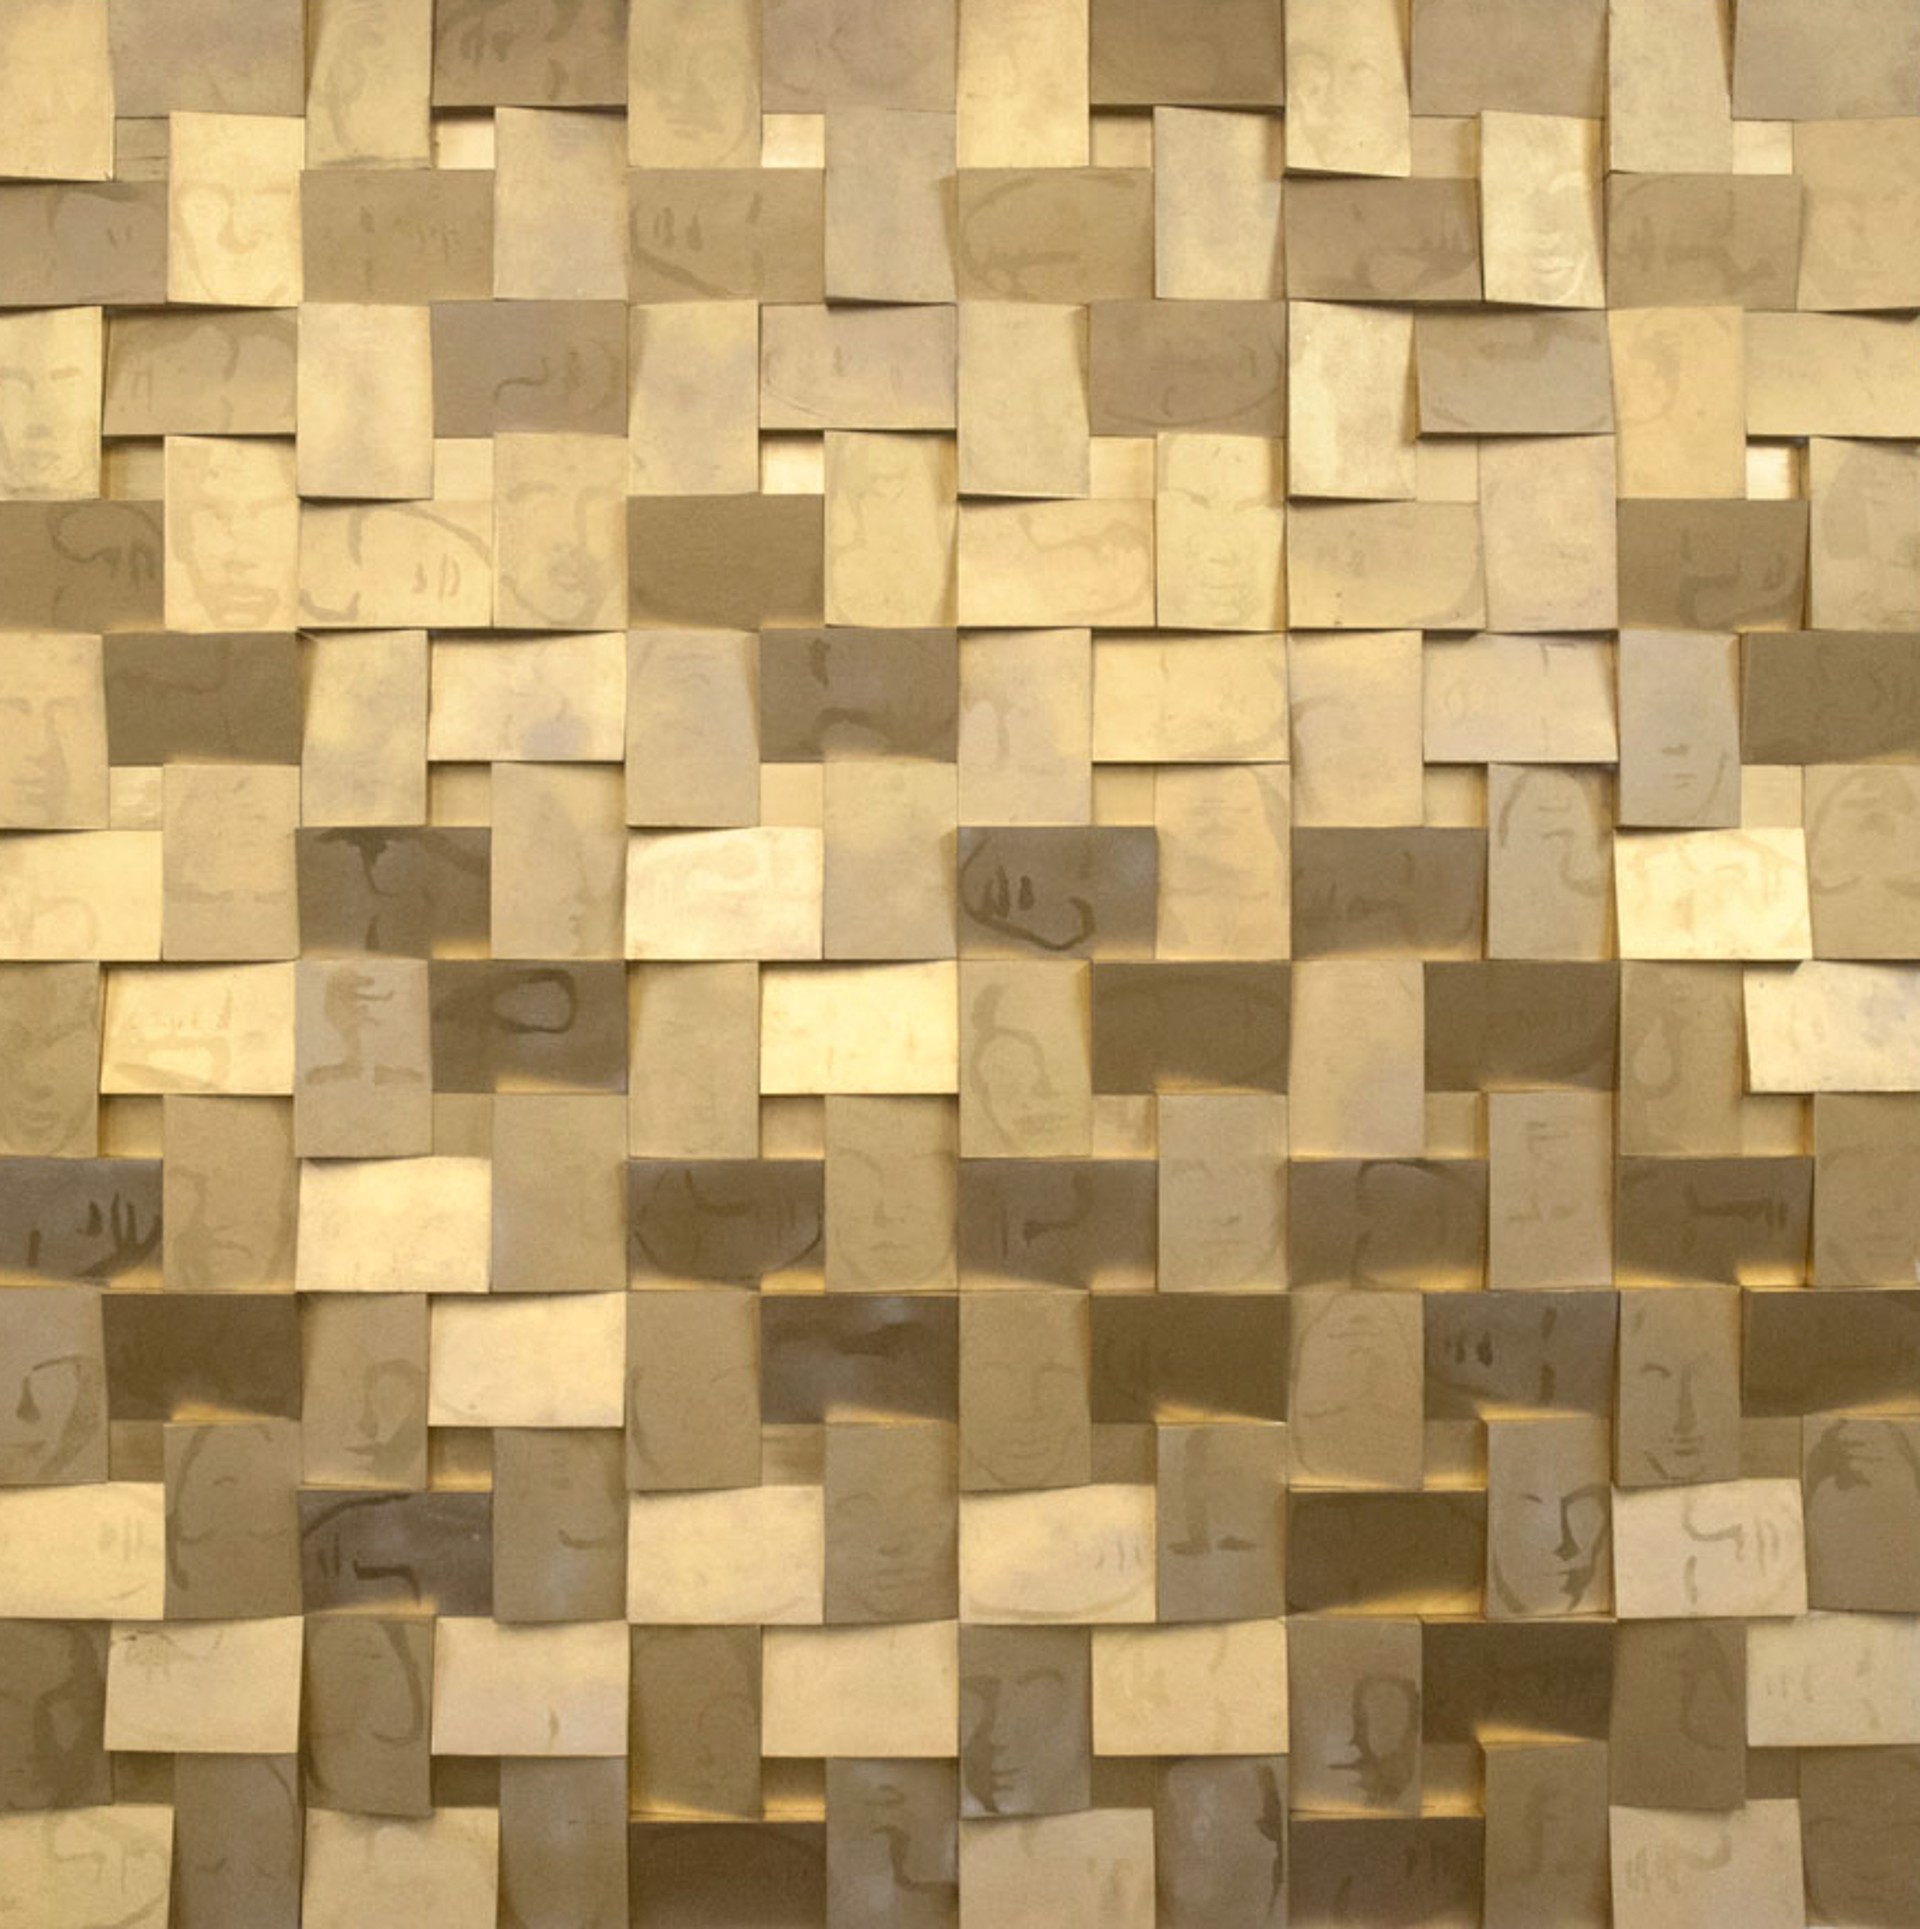 Untitled (gold relief) by Maxim Wakultschik